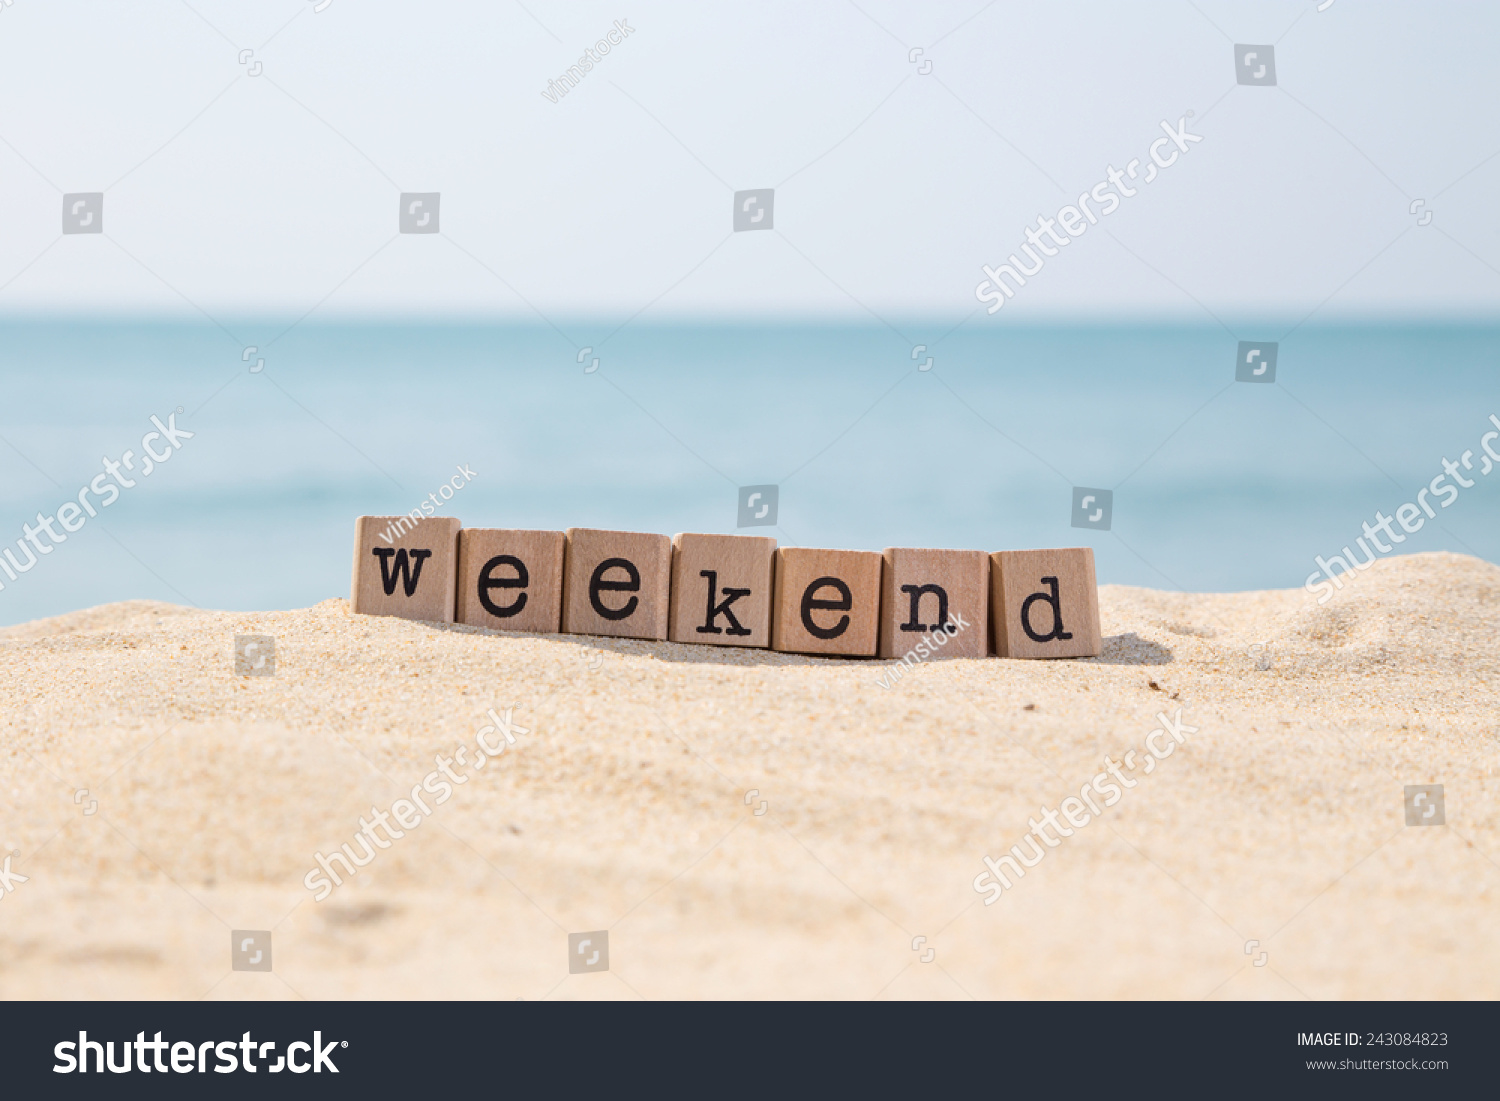 Weekend word on wood rubber stamps stack on the sand beach for vacation and summer season concept, beautiful ocean view during daytime on a sunny day with blue sky on background #243084823